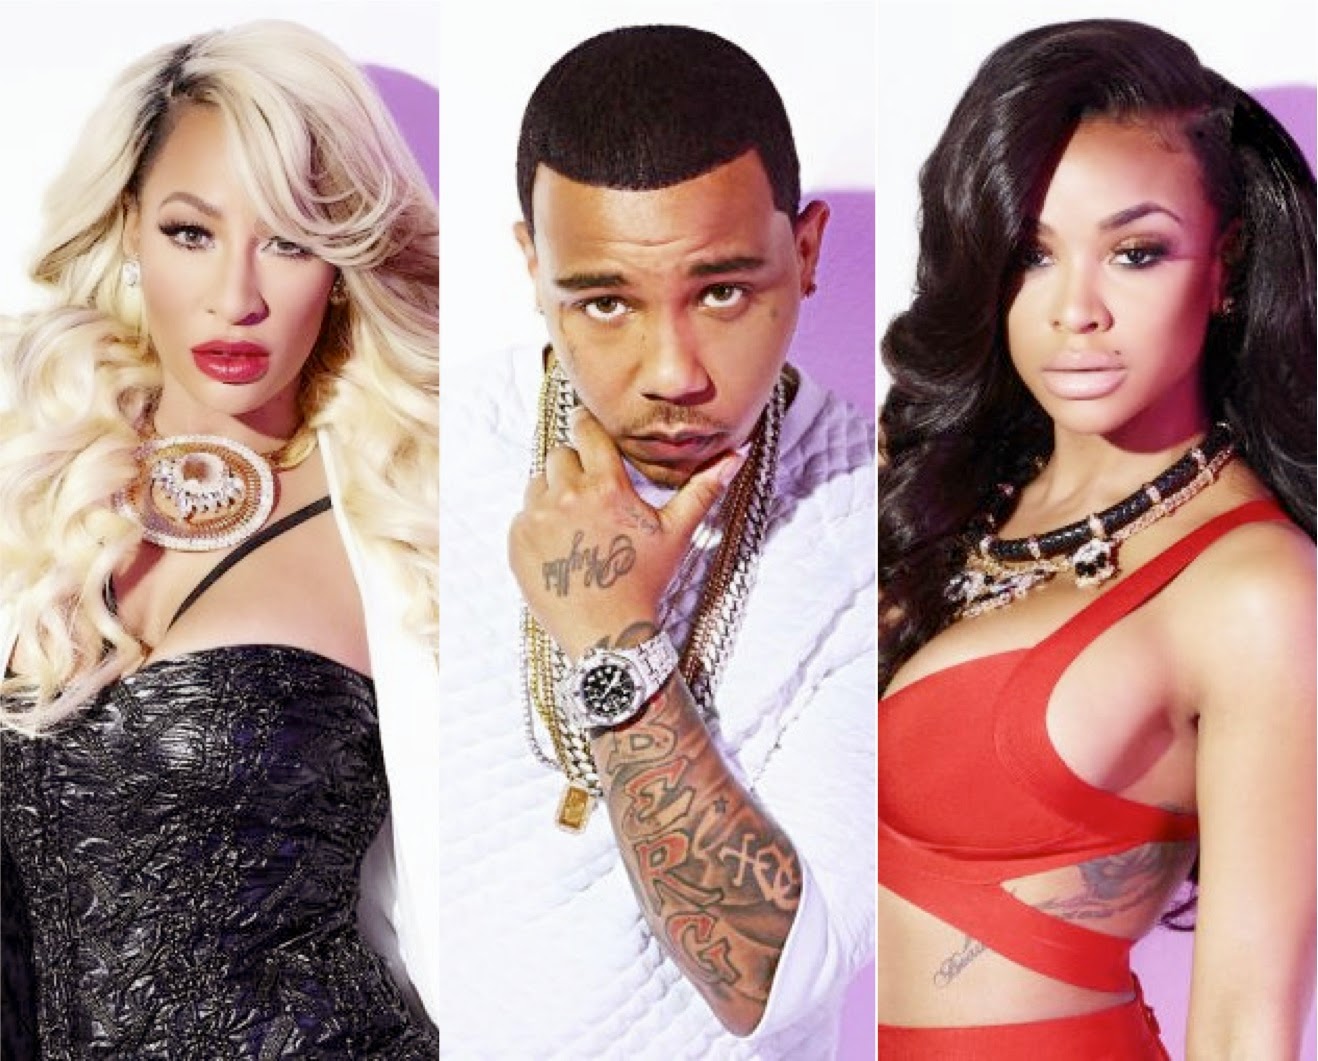 SMH....how could Masika say Yung Berg didn't attack her when police re...